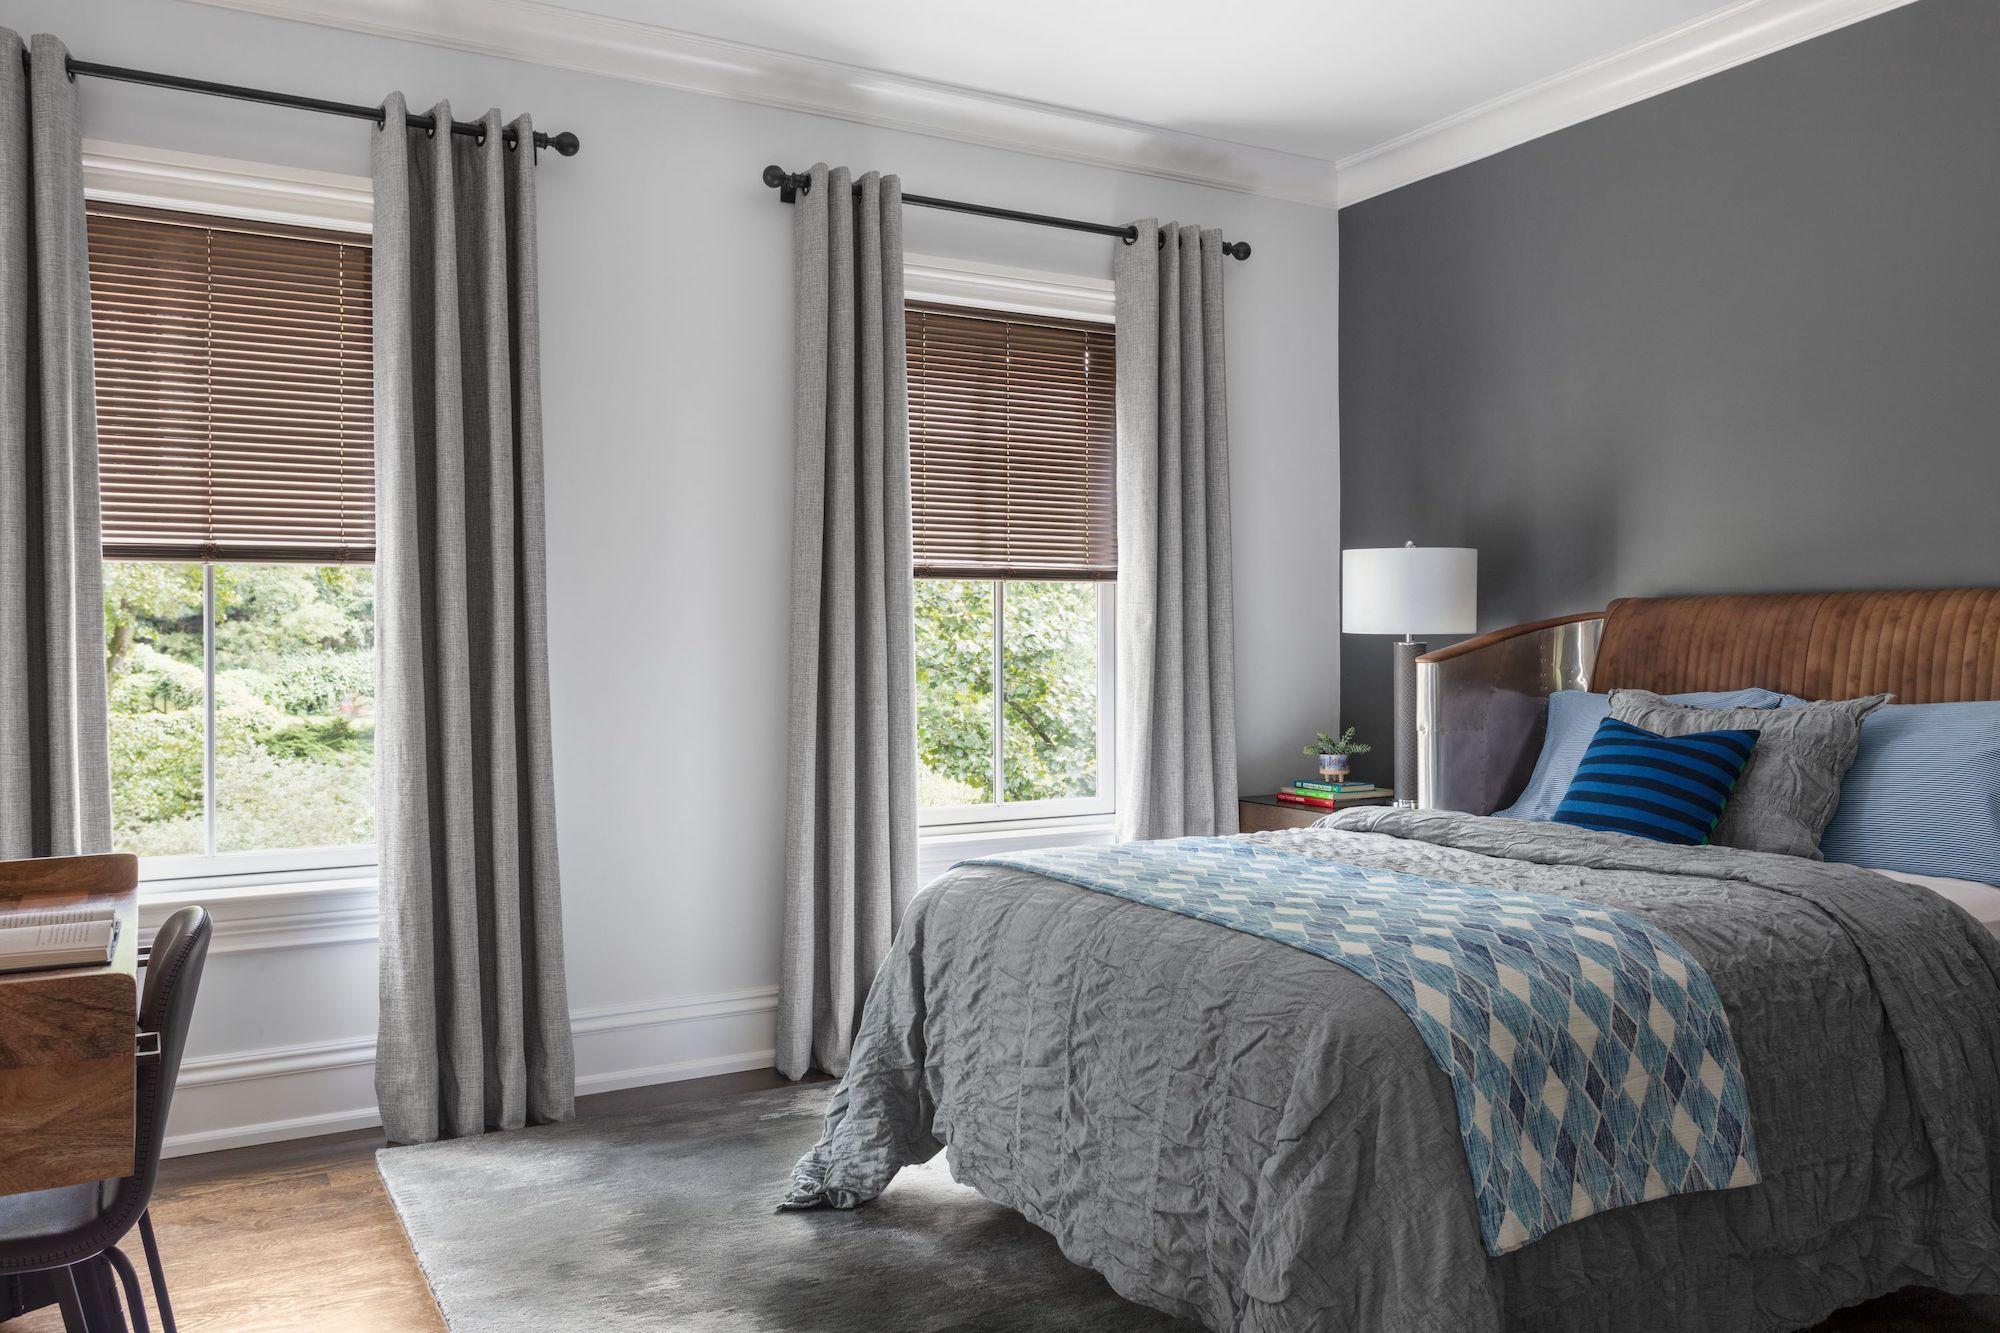 Aluminum blinds are paired with curtains on two windows in a modern bedroom